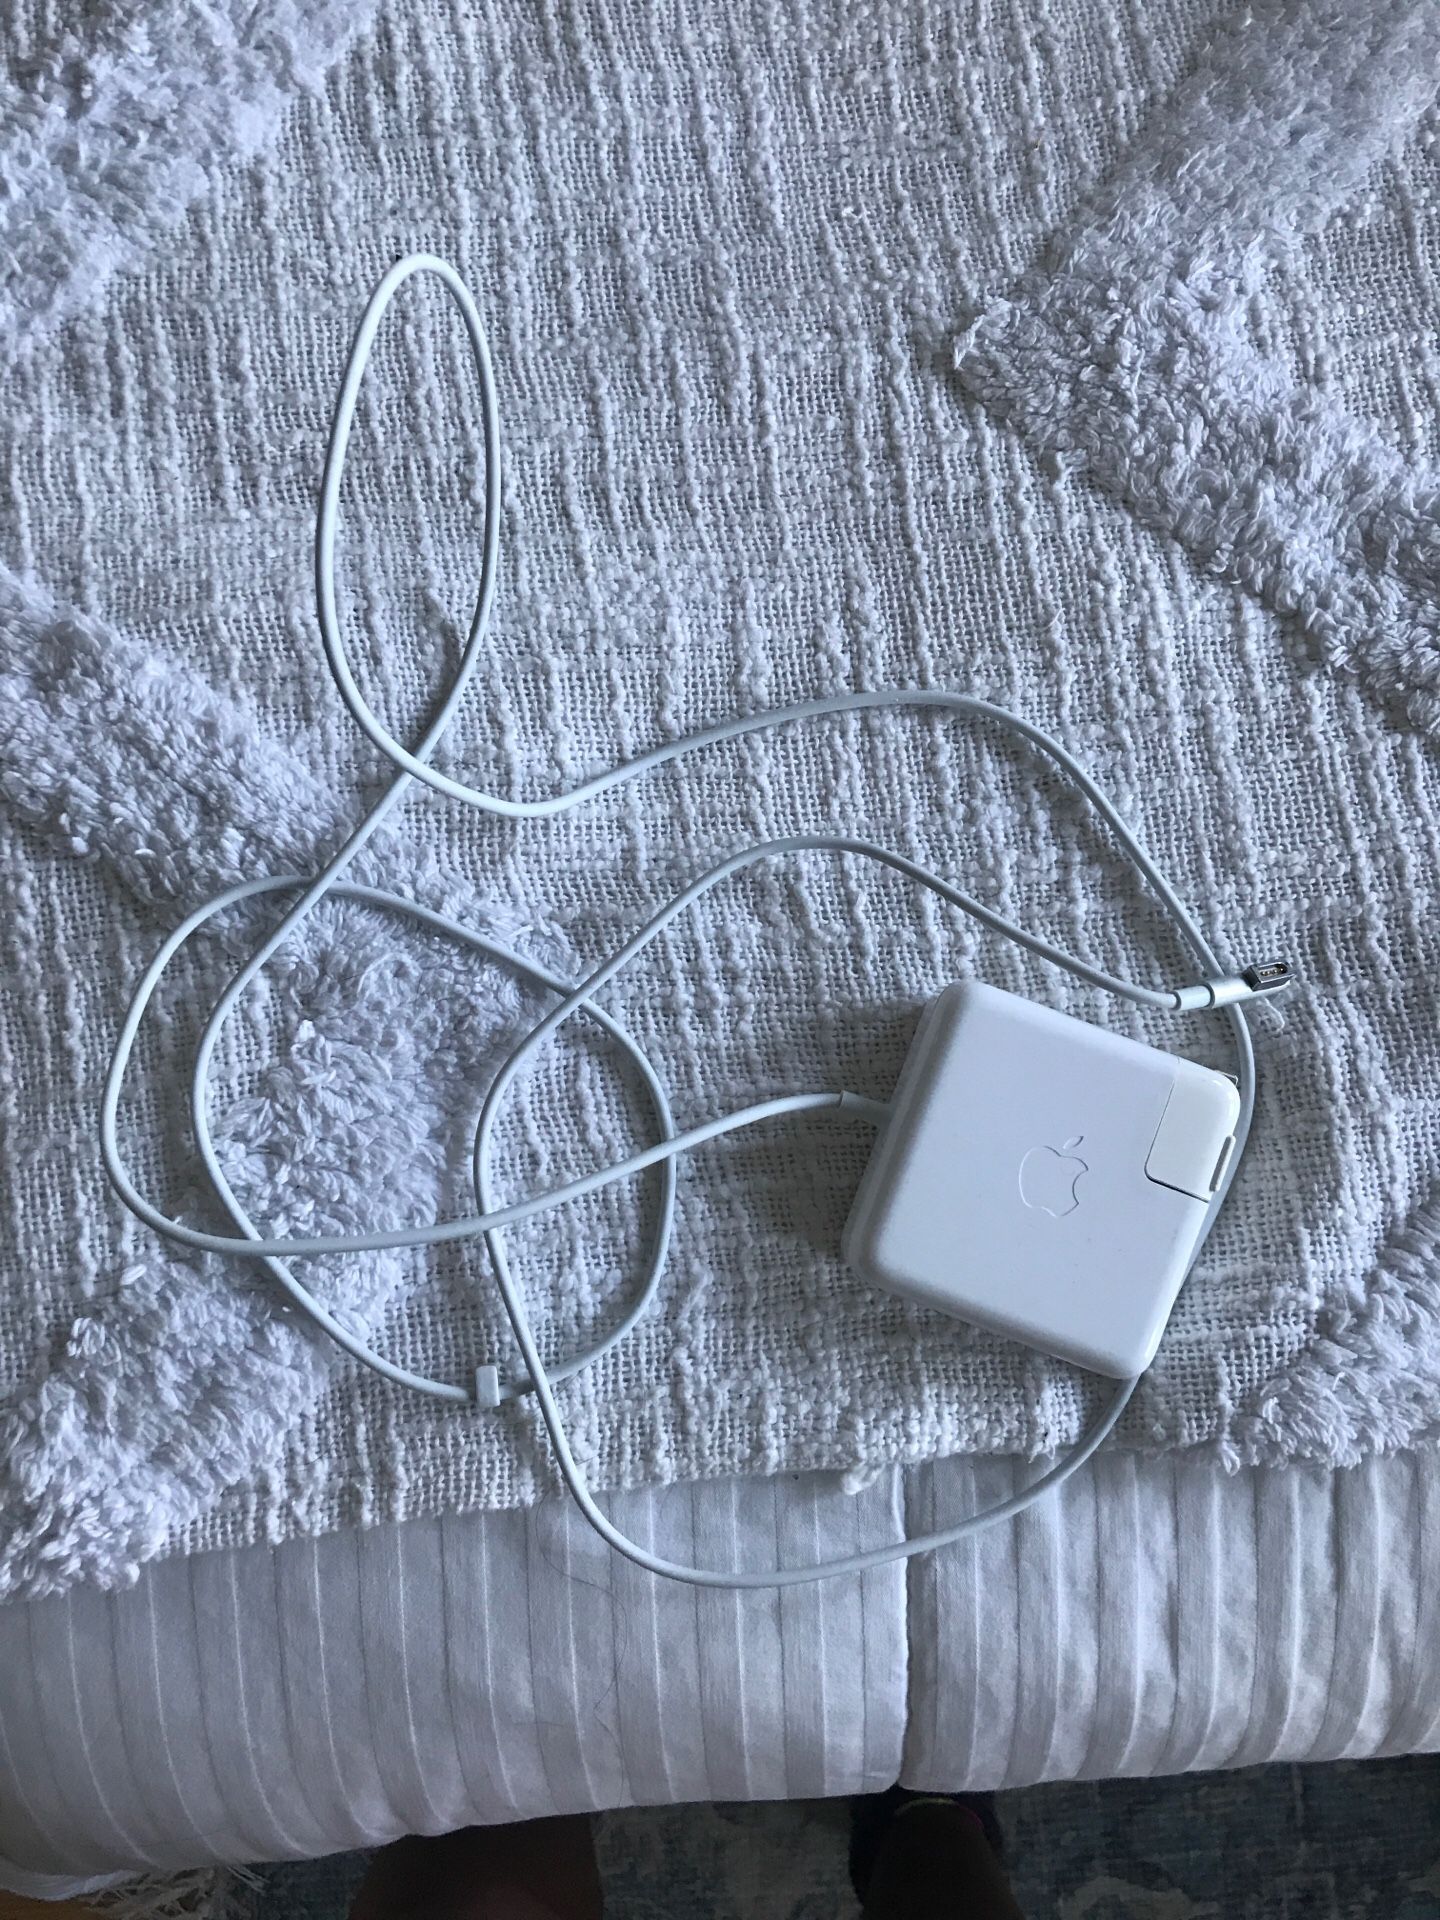 Brand new apple MacBook charger